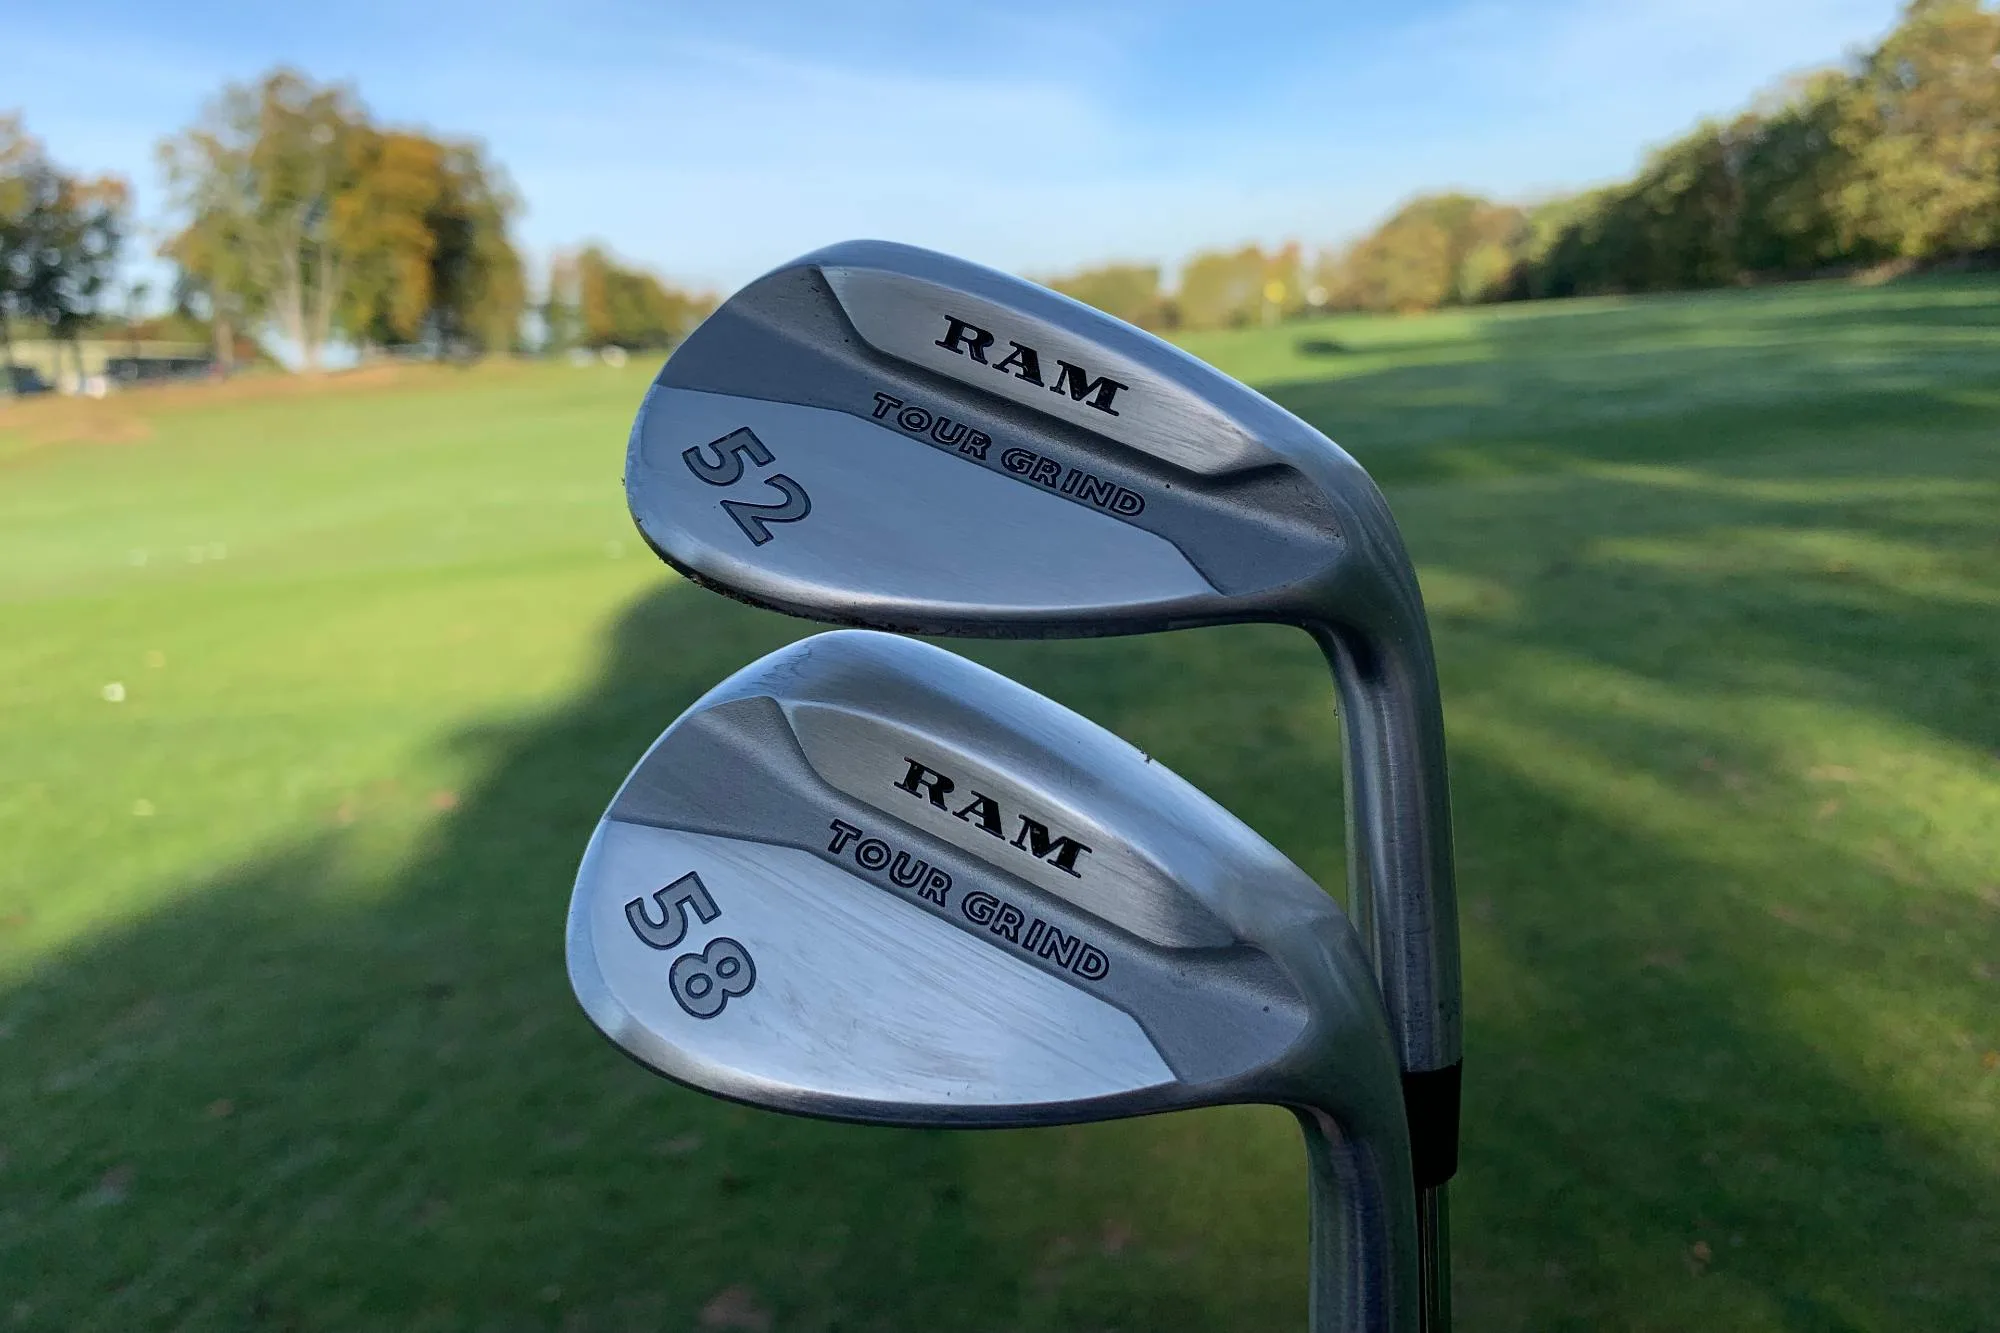 Ram Golf Tour Grind wedge review